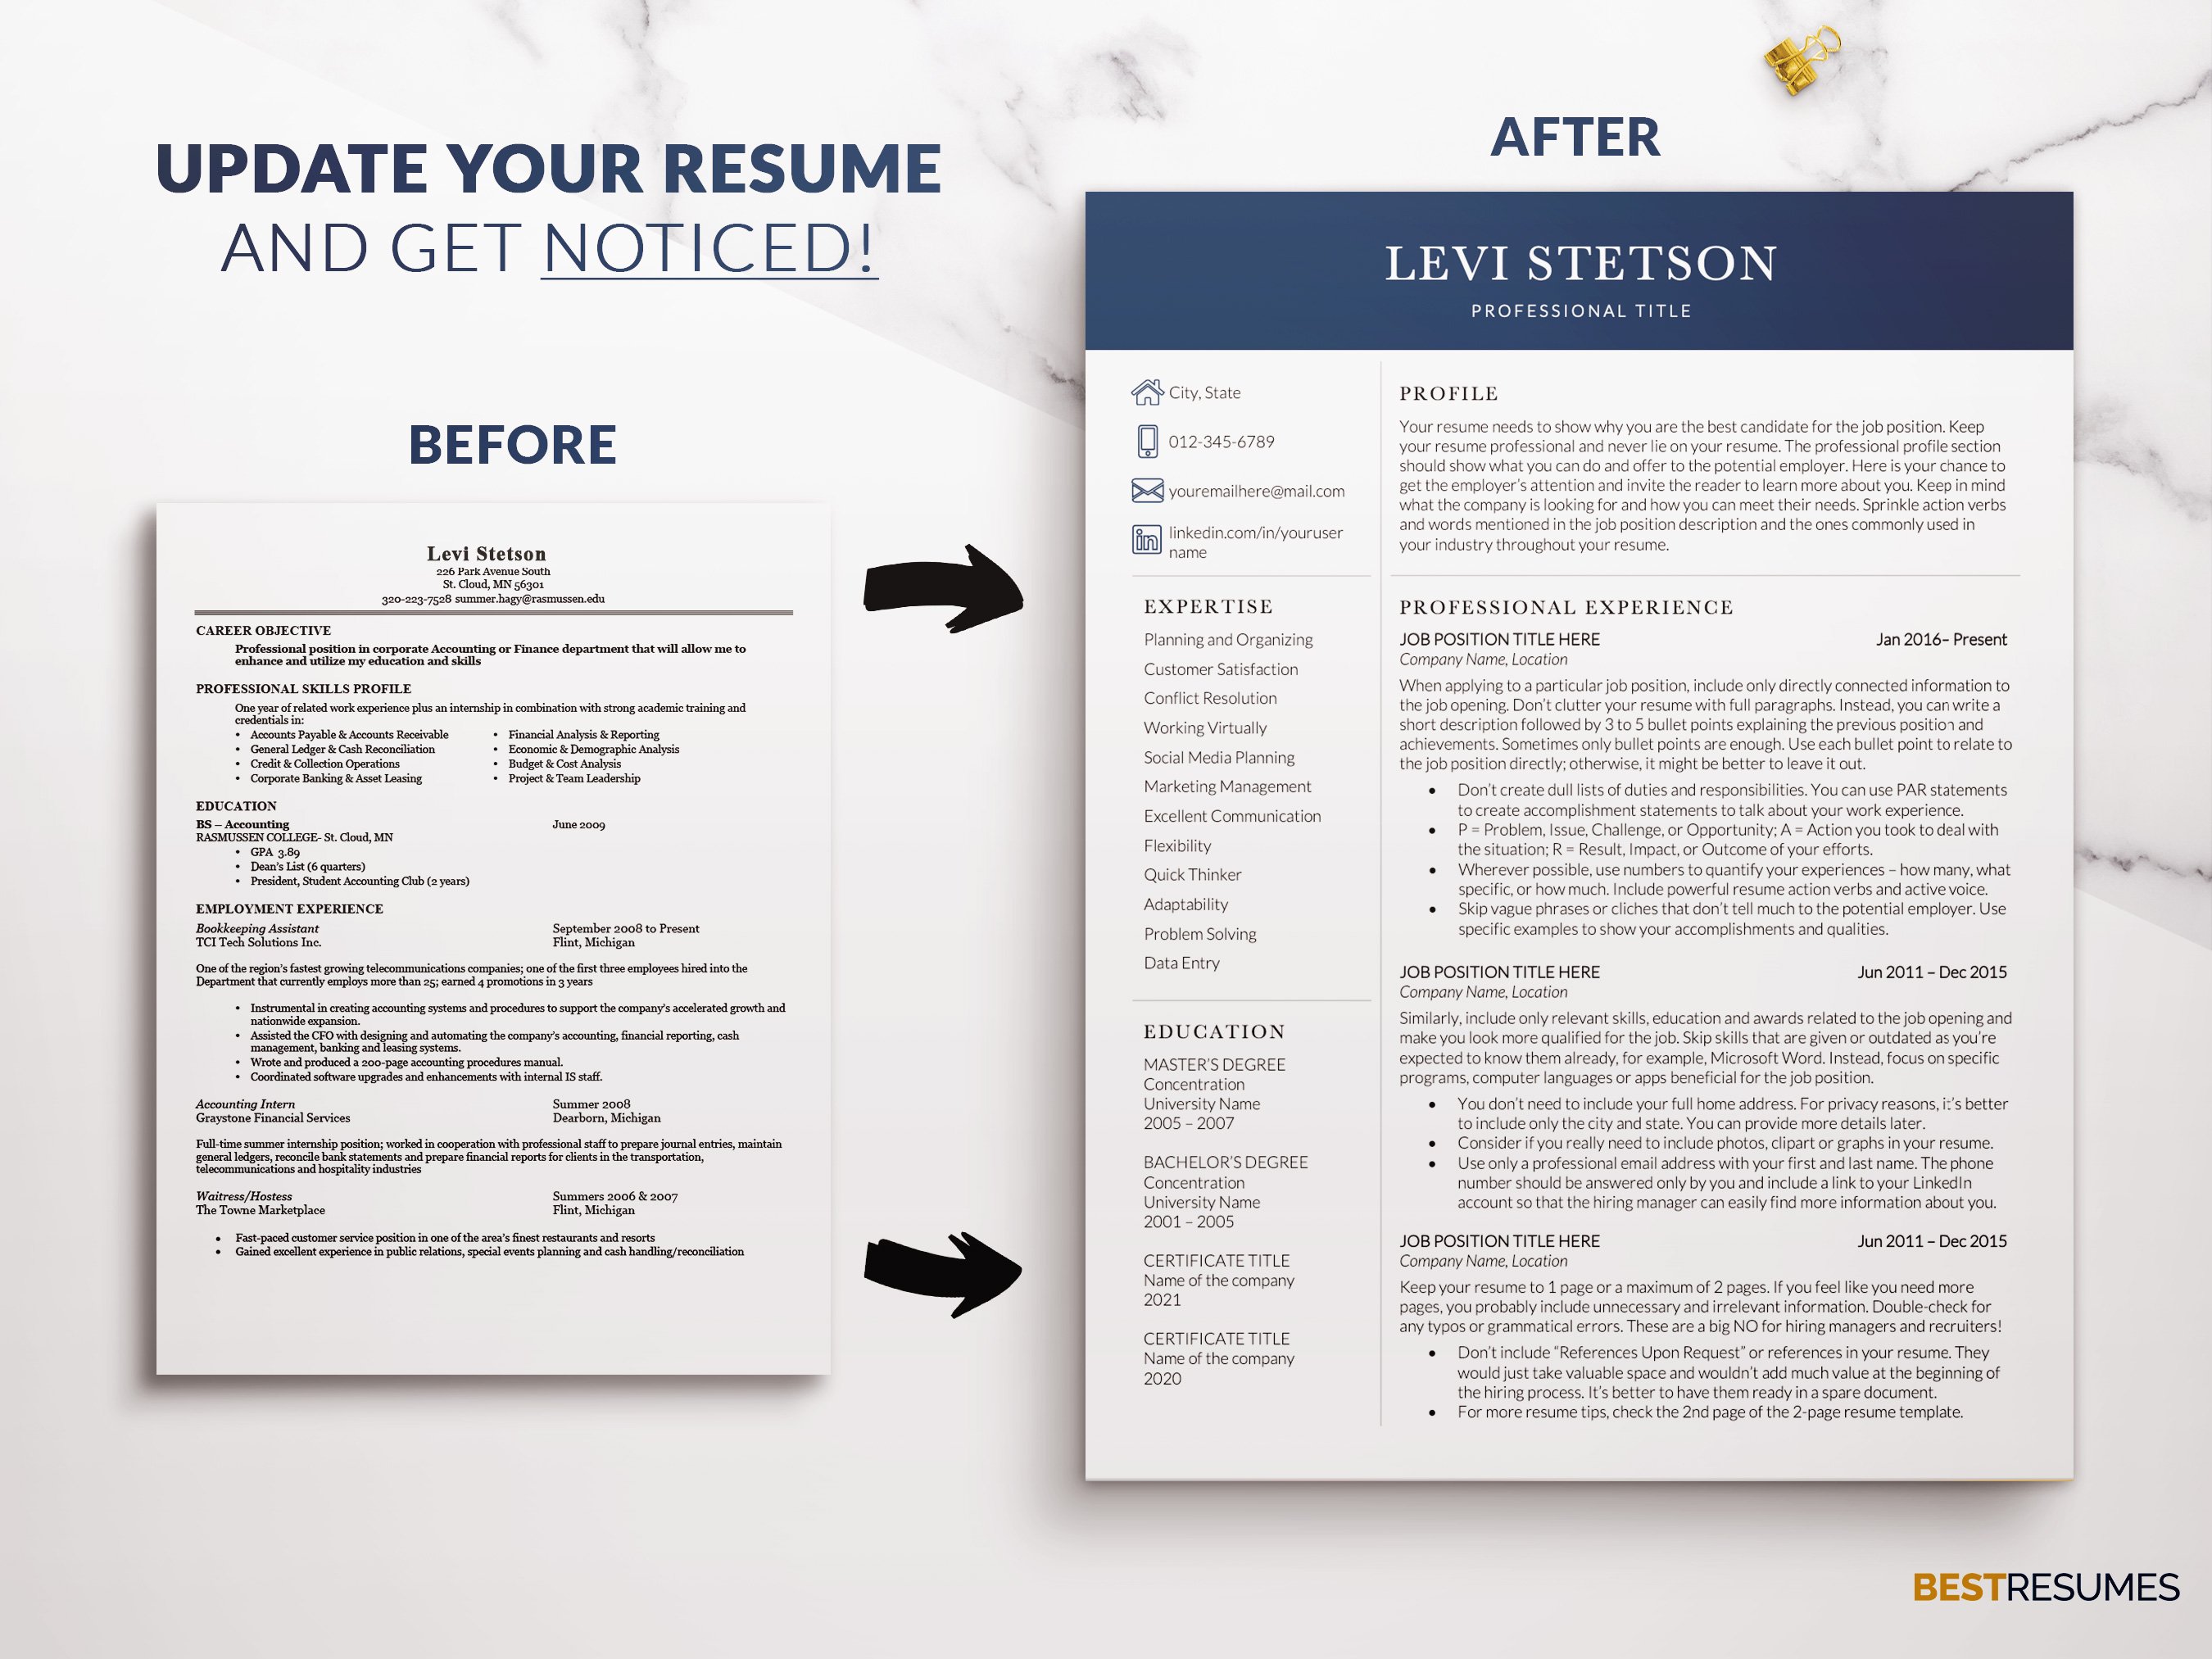 resume template word update your resume levi stetson 364